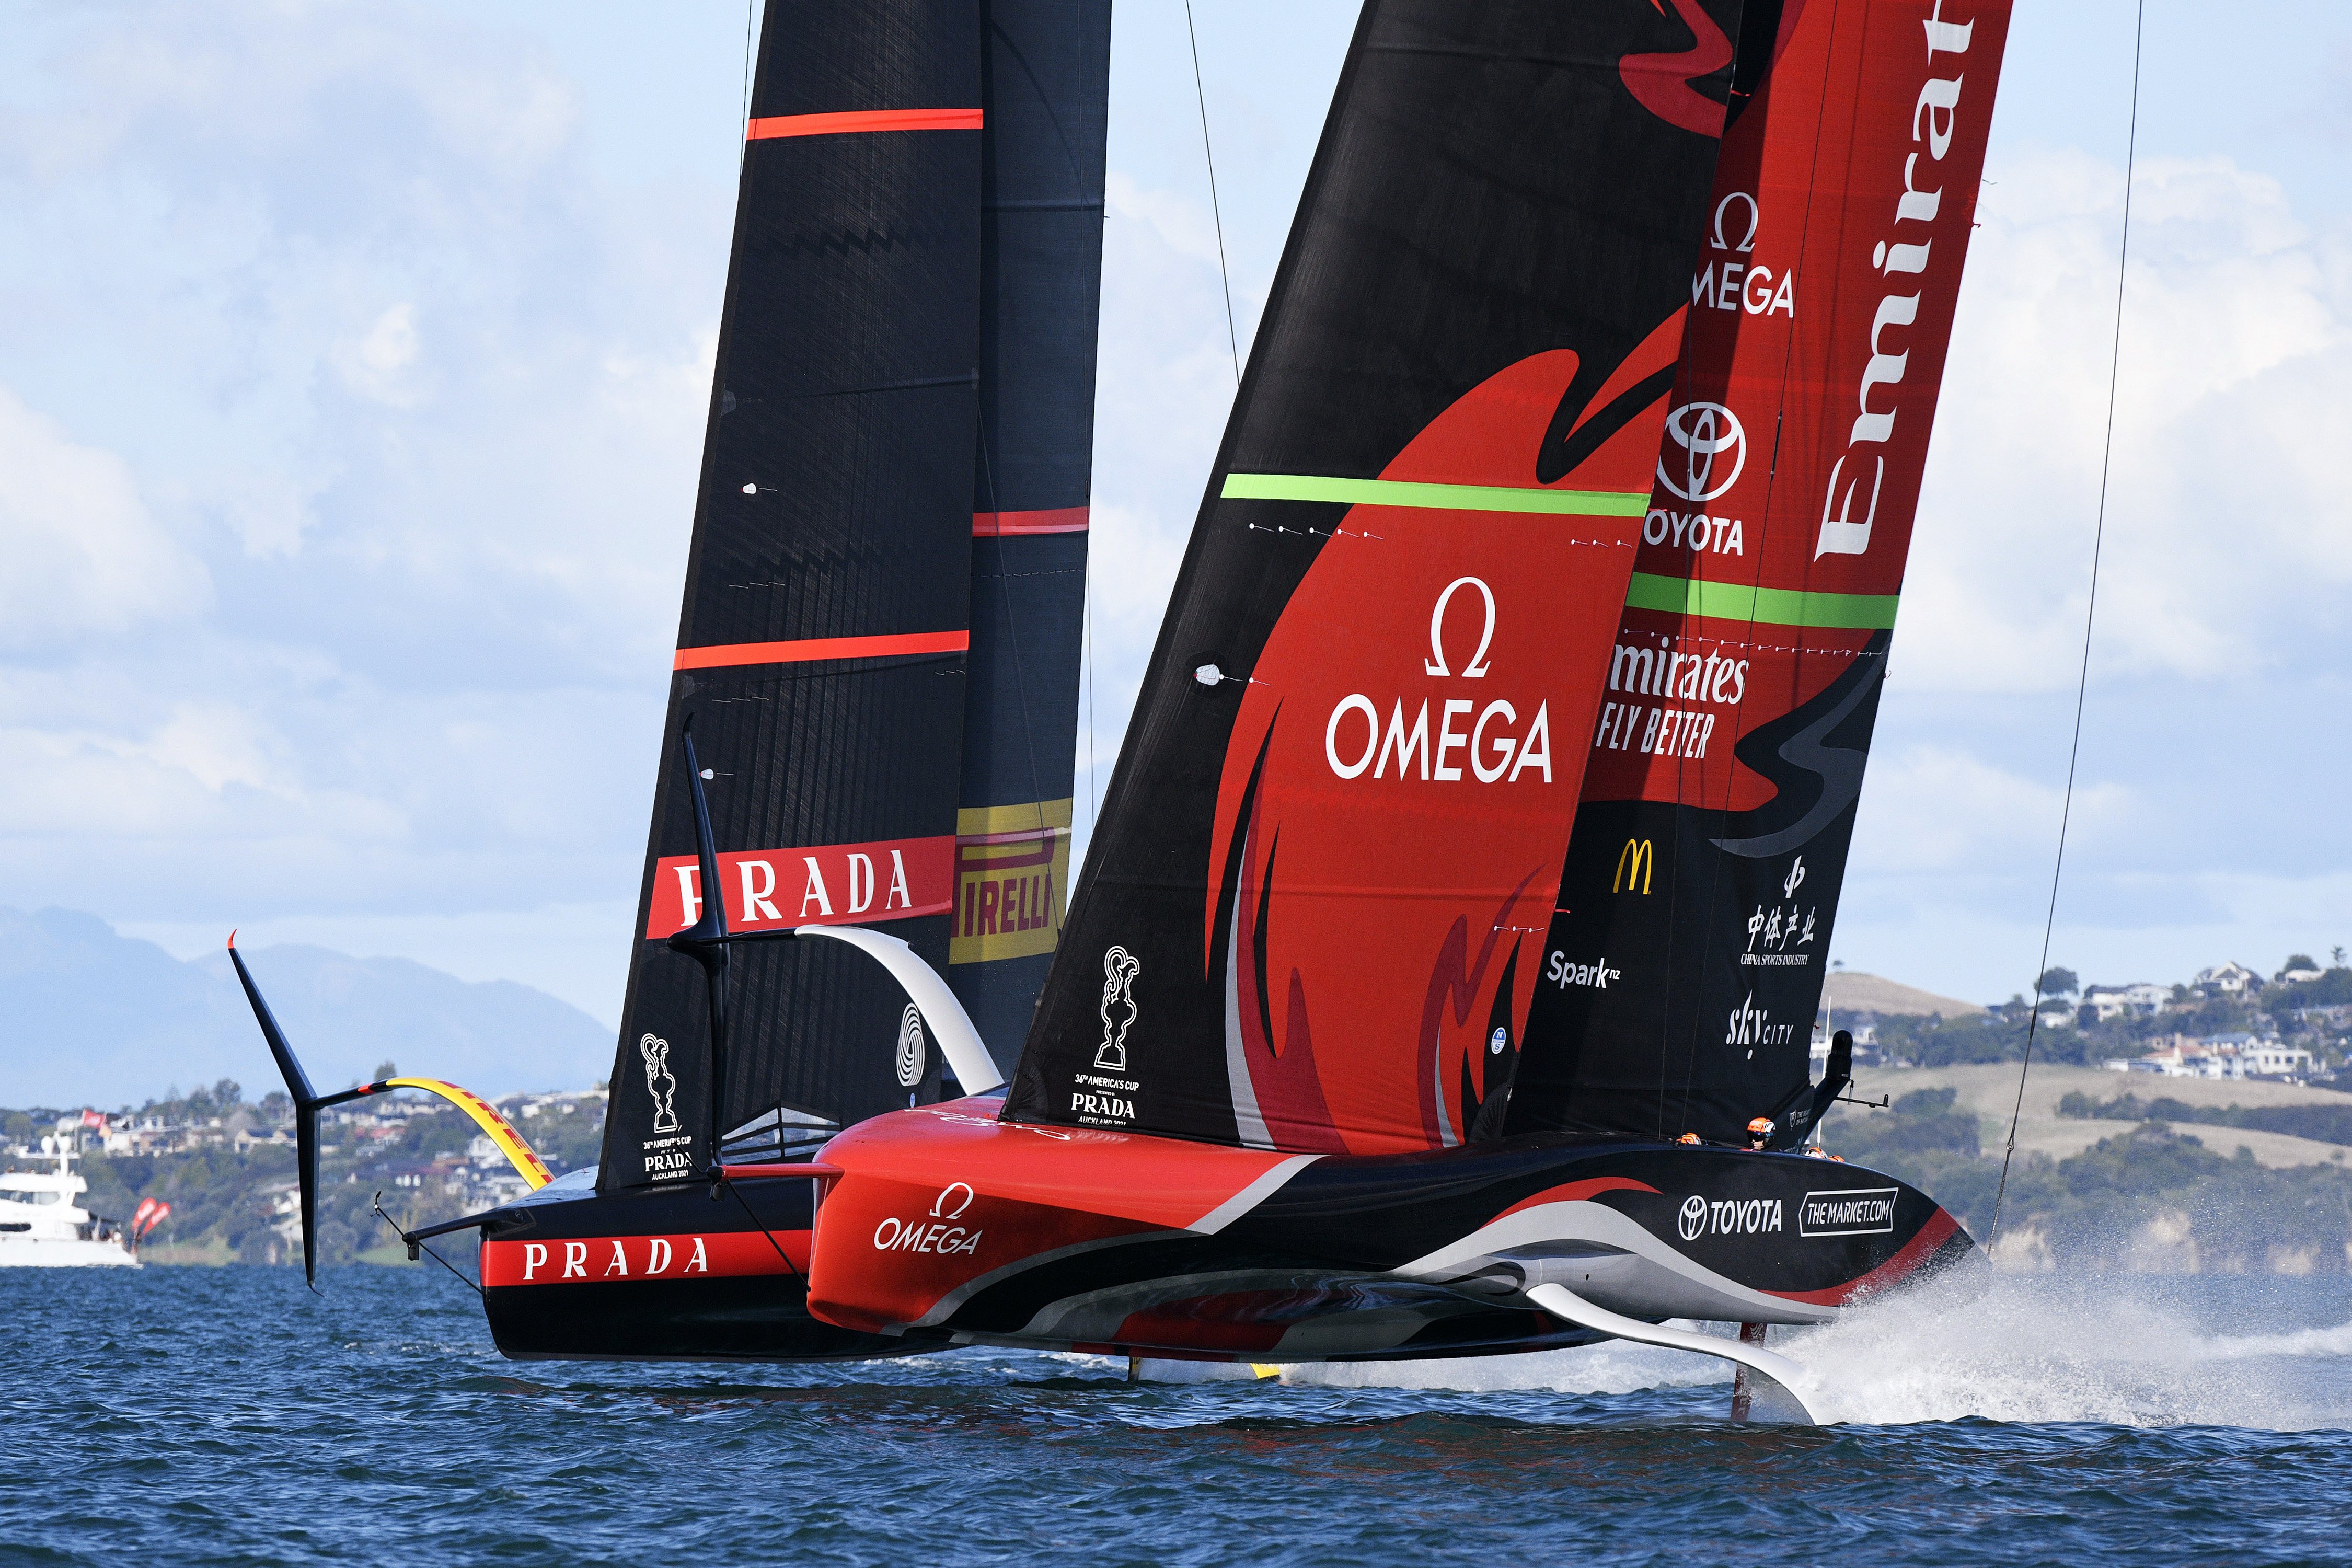 Americas Cup 2021 Live stream, TV schedule, how to watch Team New Zealand vs